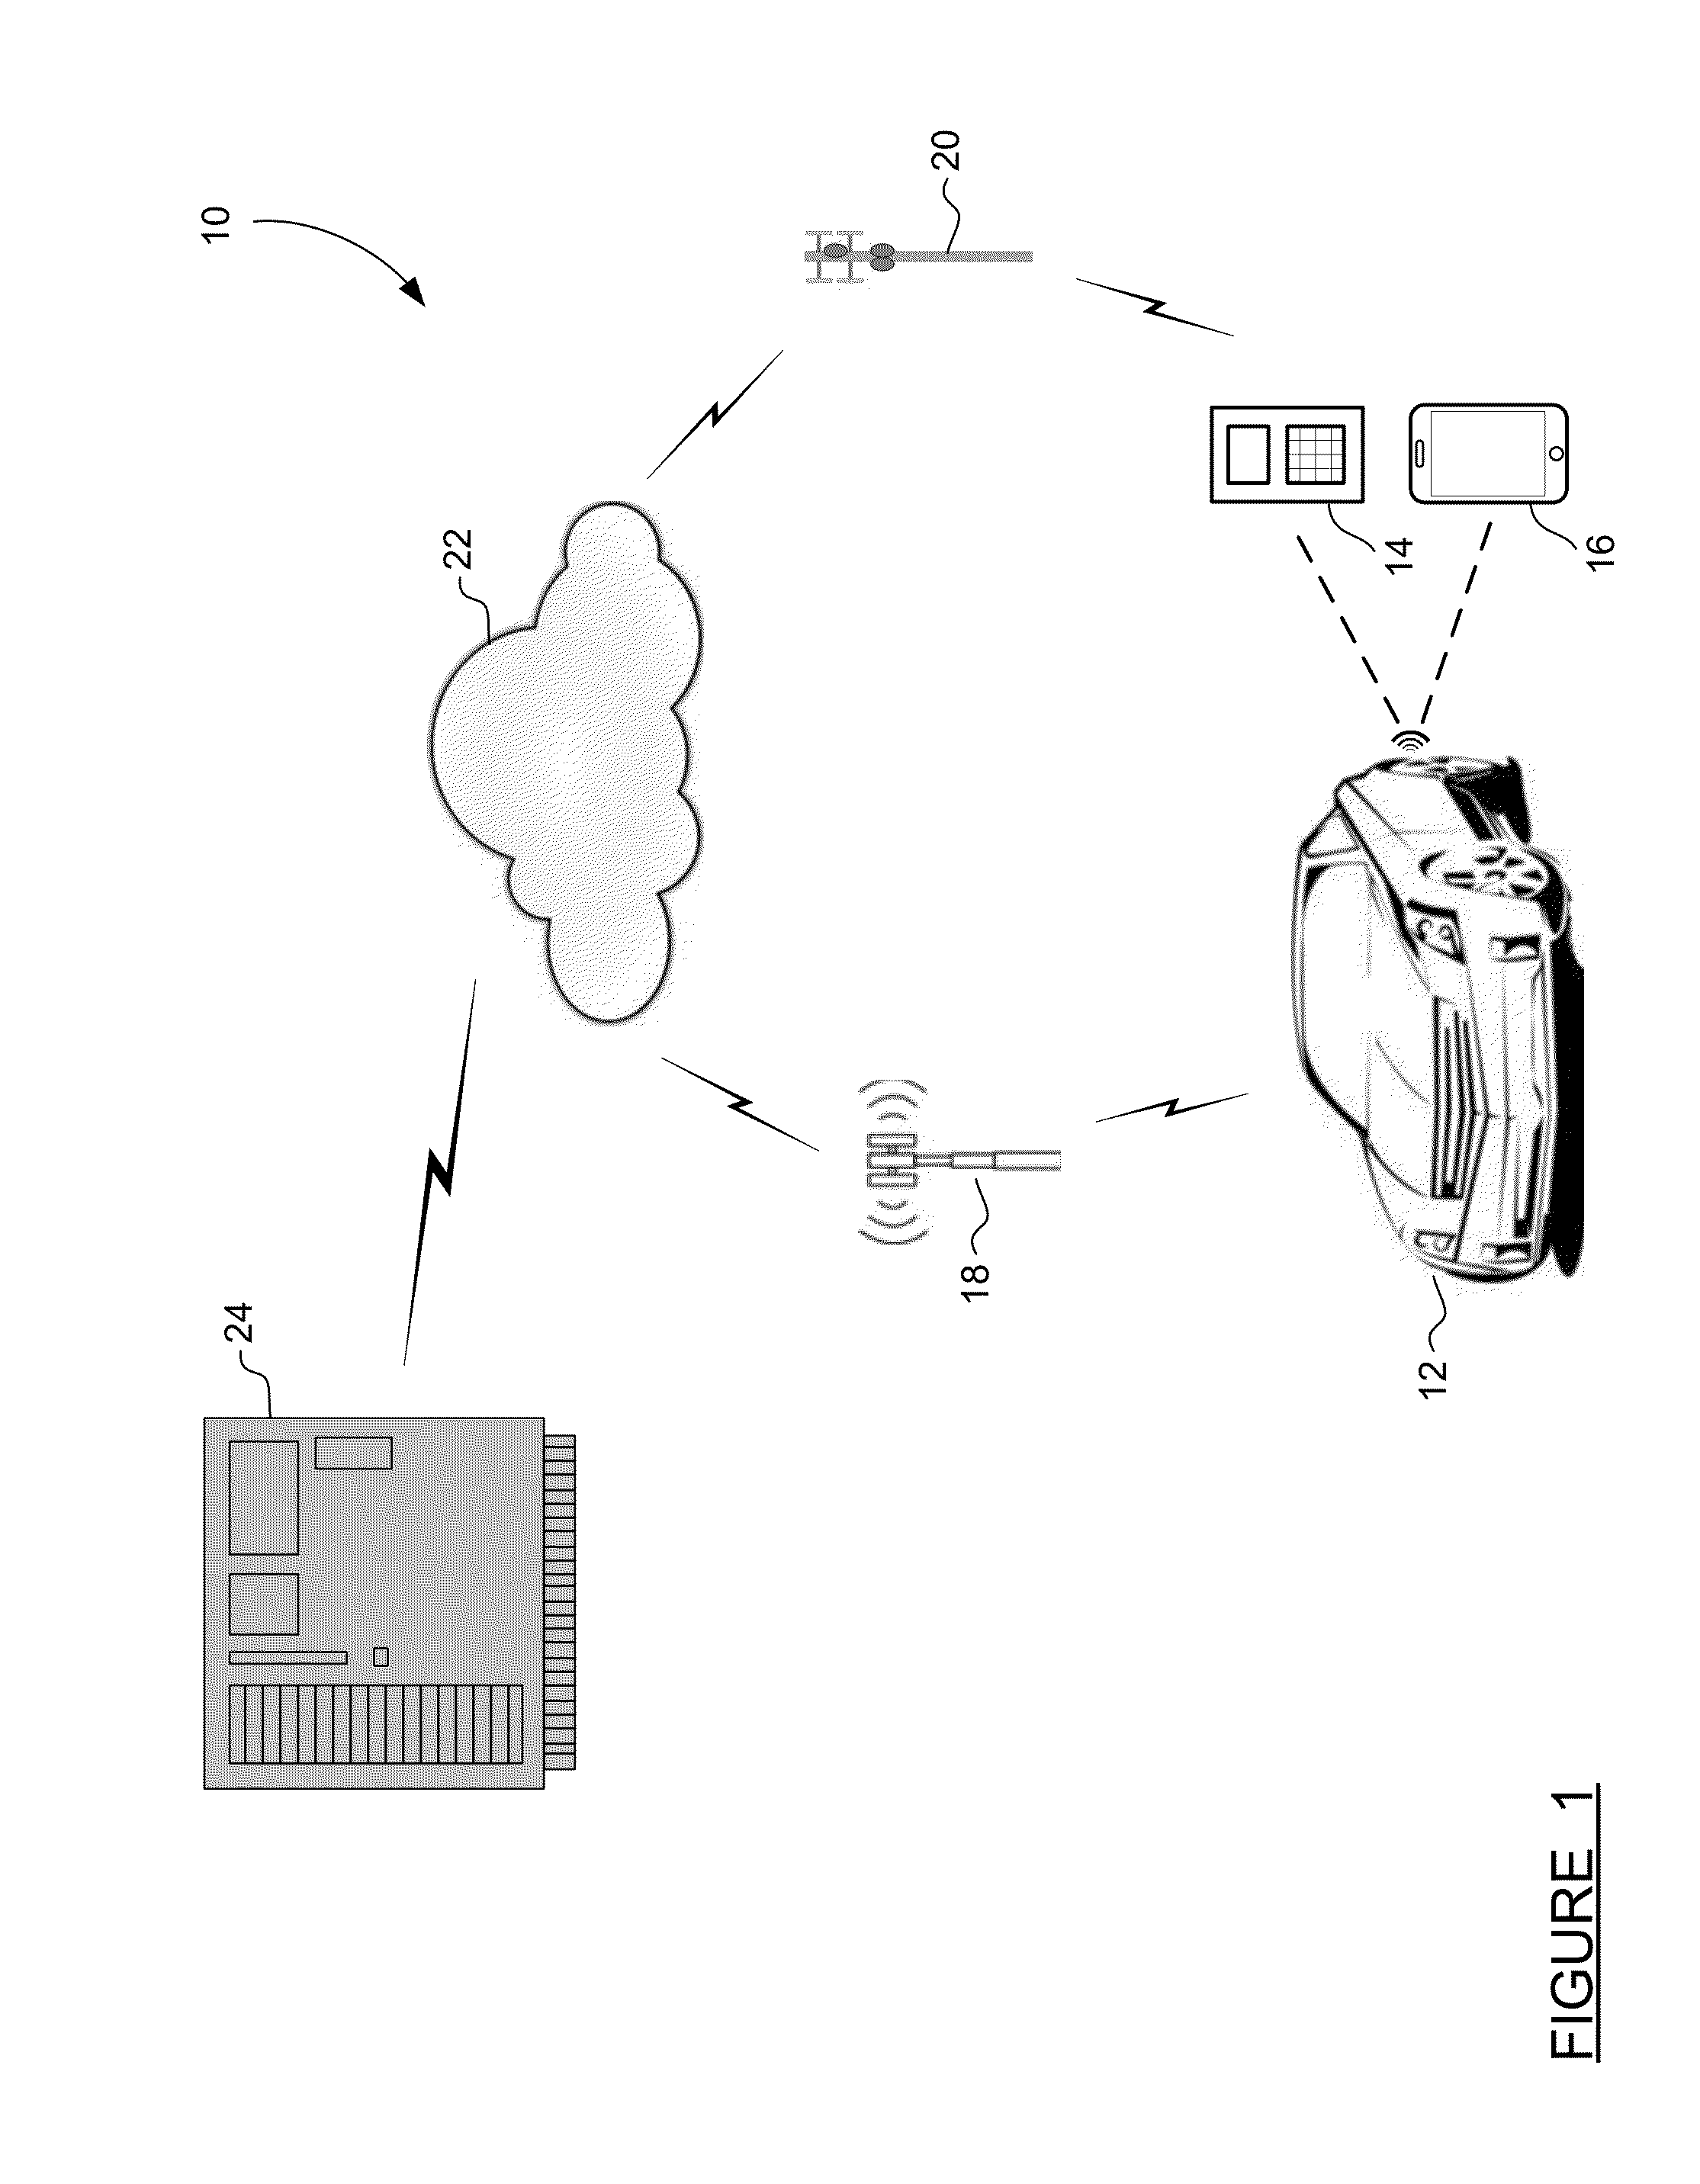 Method and apparatus for secure pairing of mobile devices with vehicles using telematics system